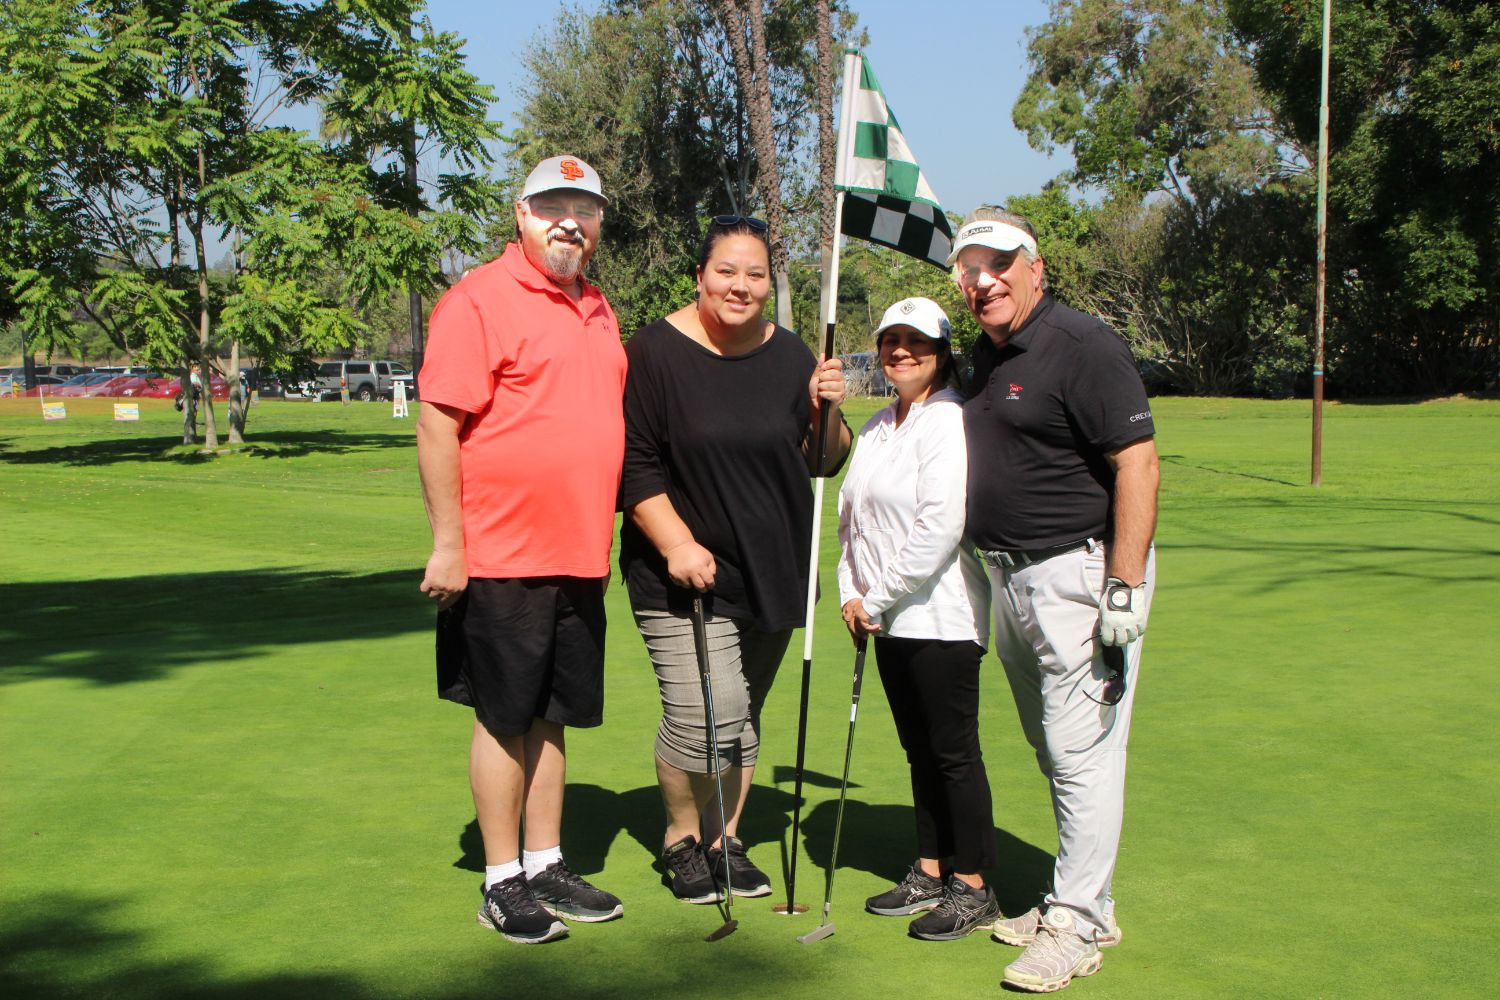 PHOTO: Henk Friezer | The South Pasadenan | Enjoying the sunny day on the course are (L-R) Alberto Ocon, Ericka Giordano, and Monique and David Maling.